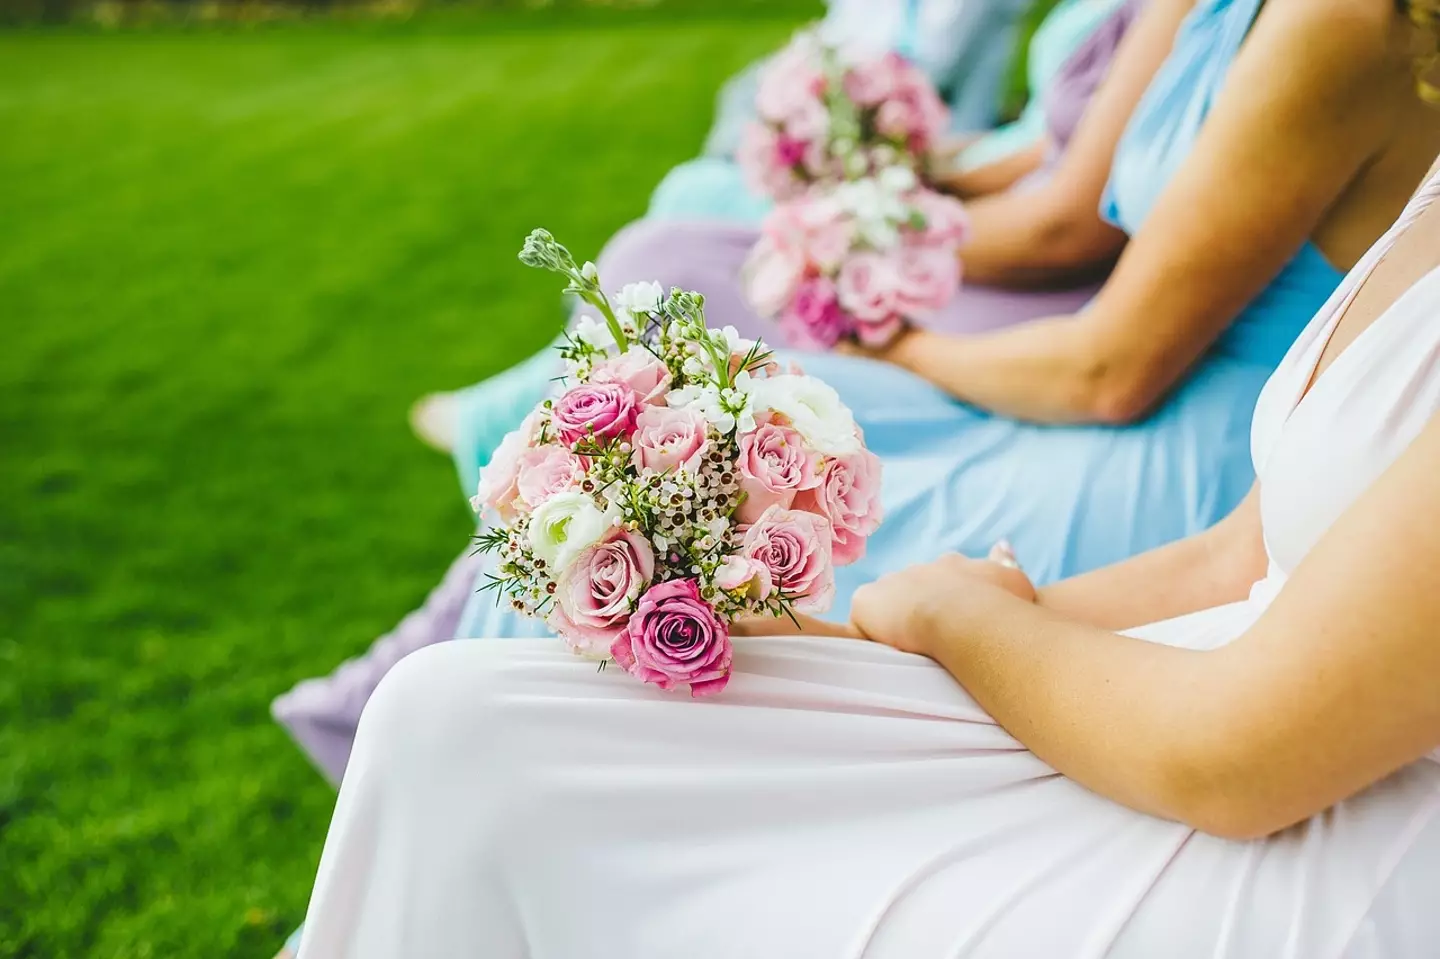 There's a lot of wedding etiquette to remember as a guest.